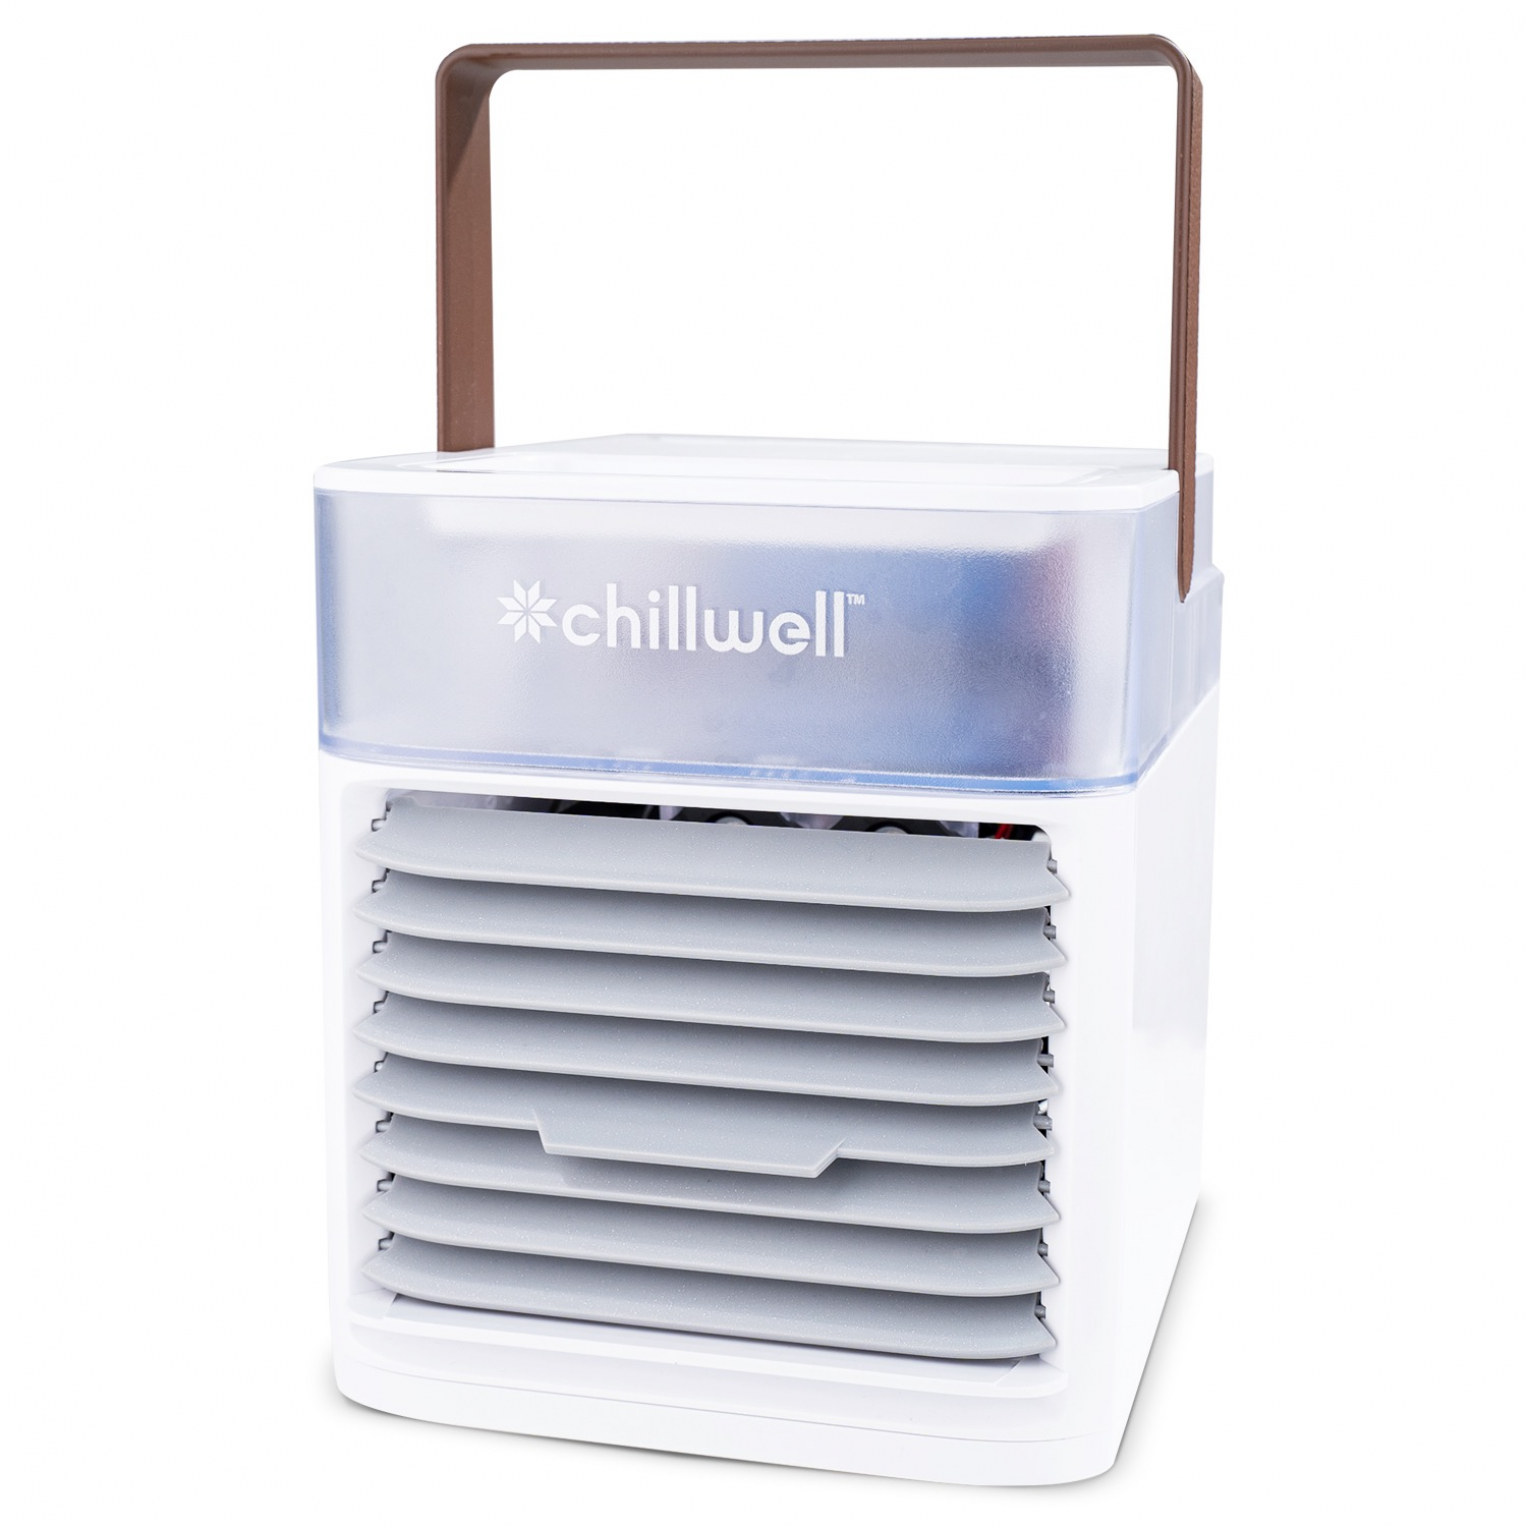 Try Chillwell Ac Reviews